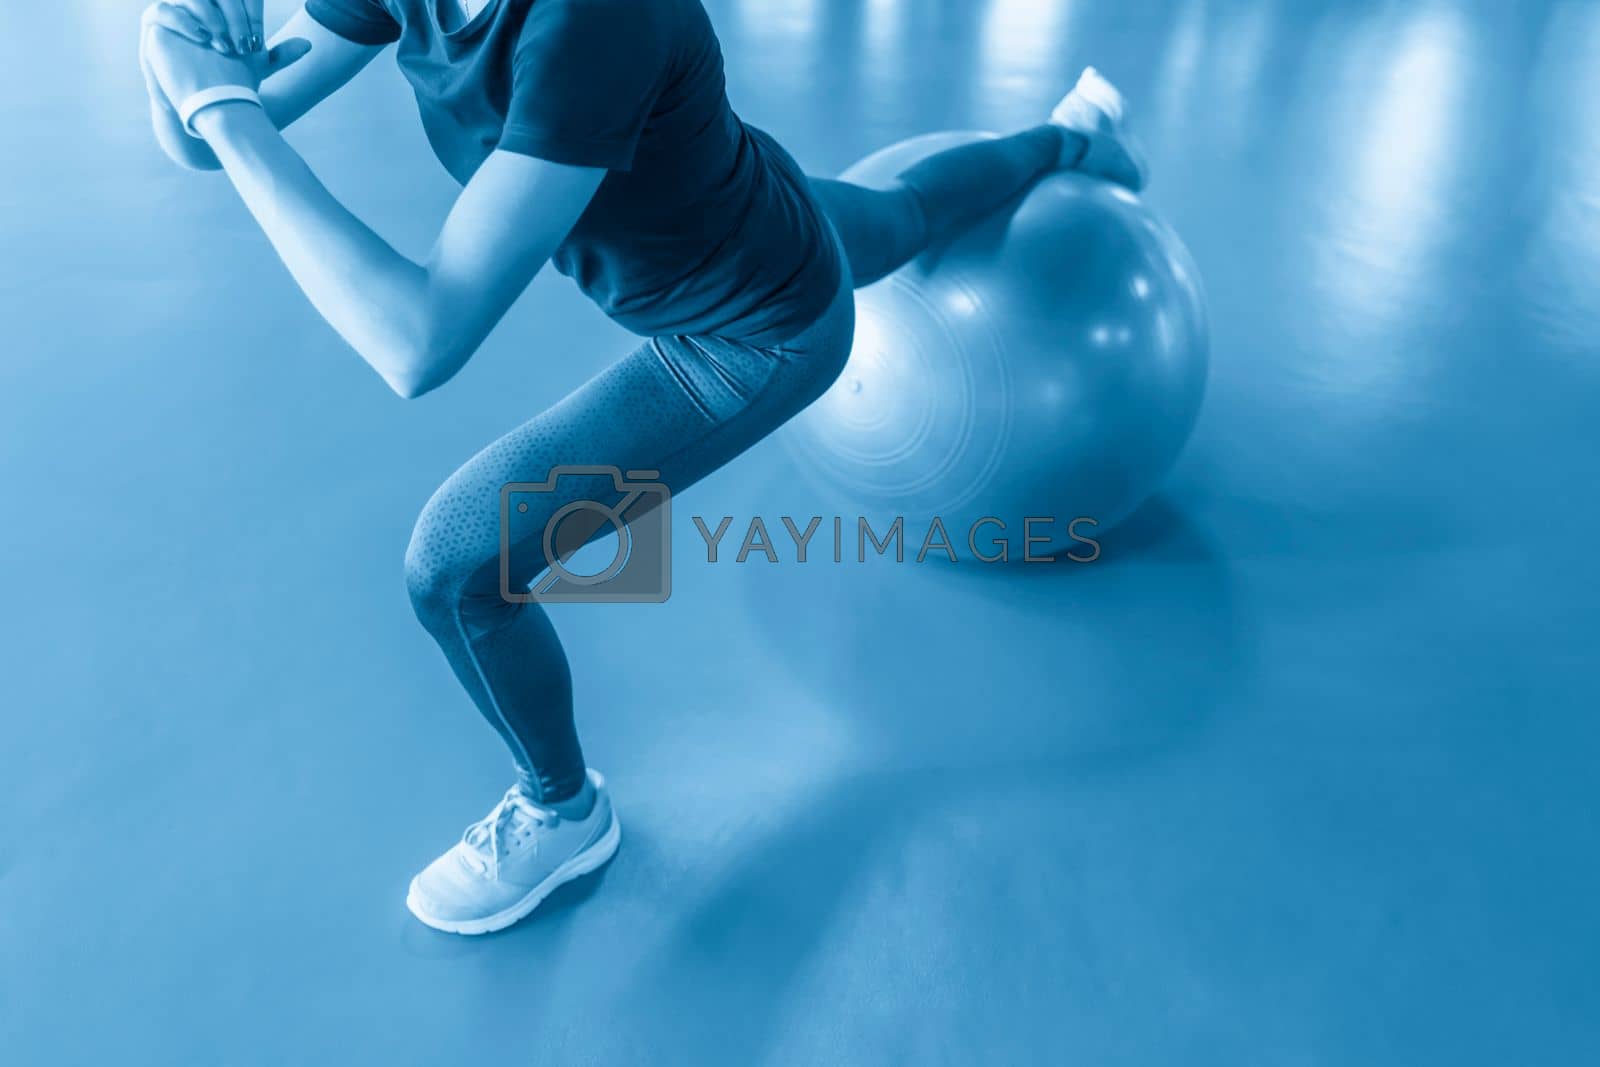 Royalty free image of Woman at the gym doing exercises with pilates ball by Mariakray